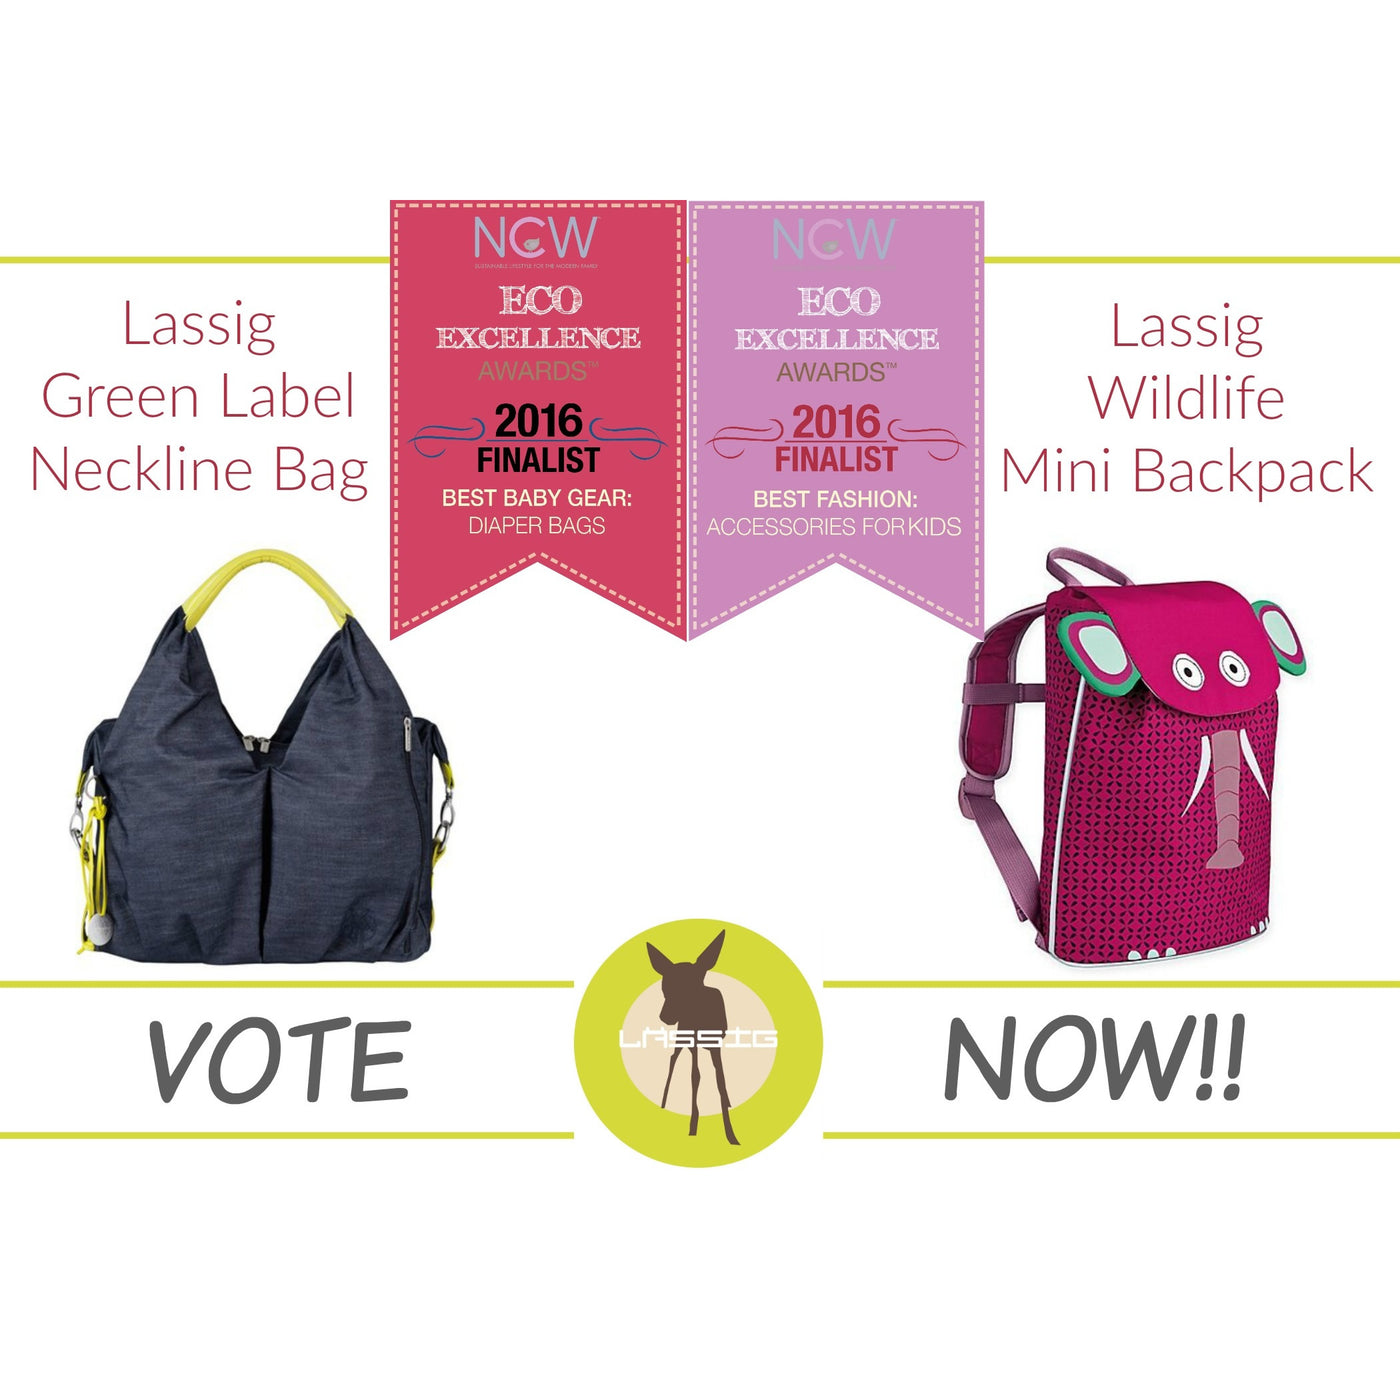 Lassig Nominated for 2016 Eco Excellence Awards - Vote Now!